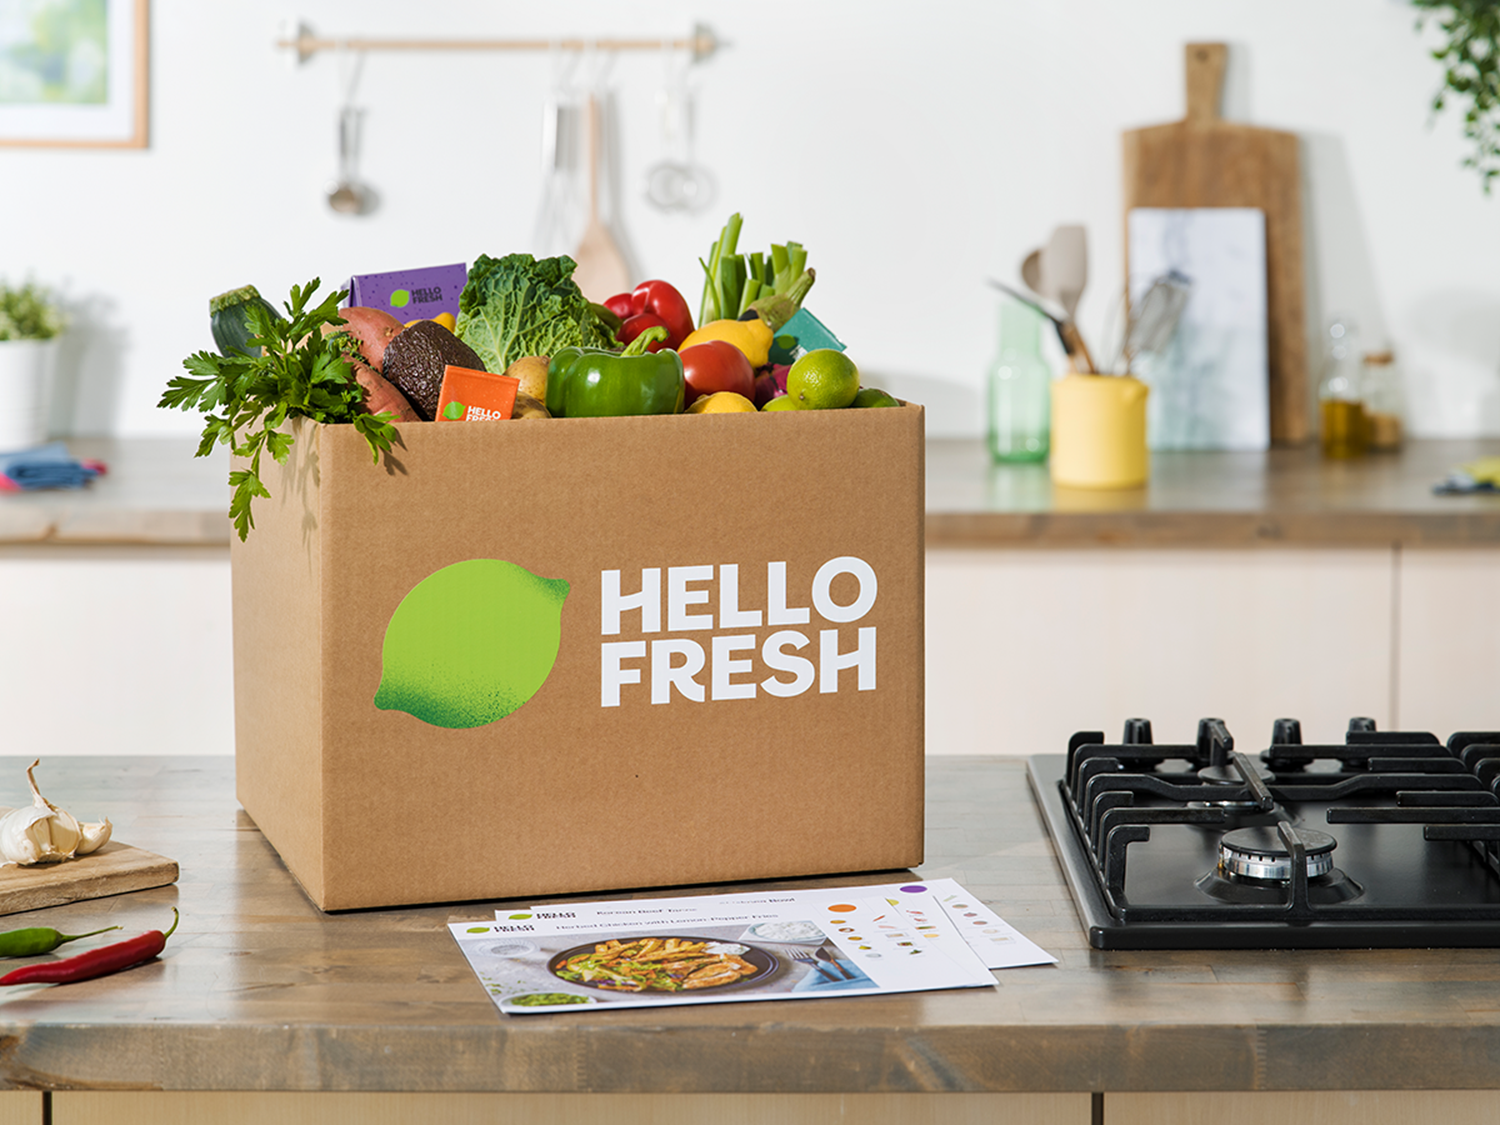 Win a month of HelloFresh meals for two people | The Independent